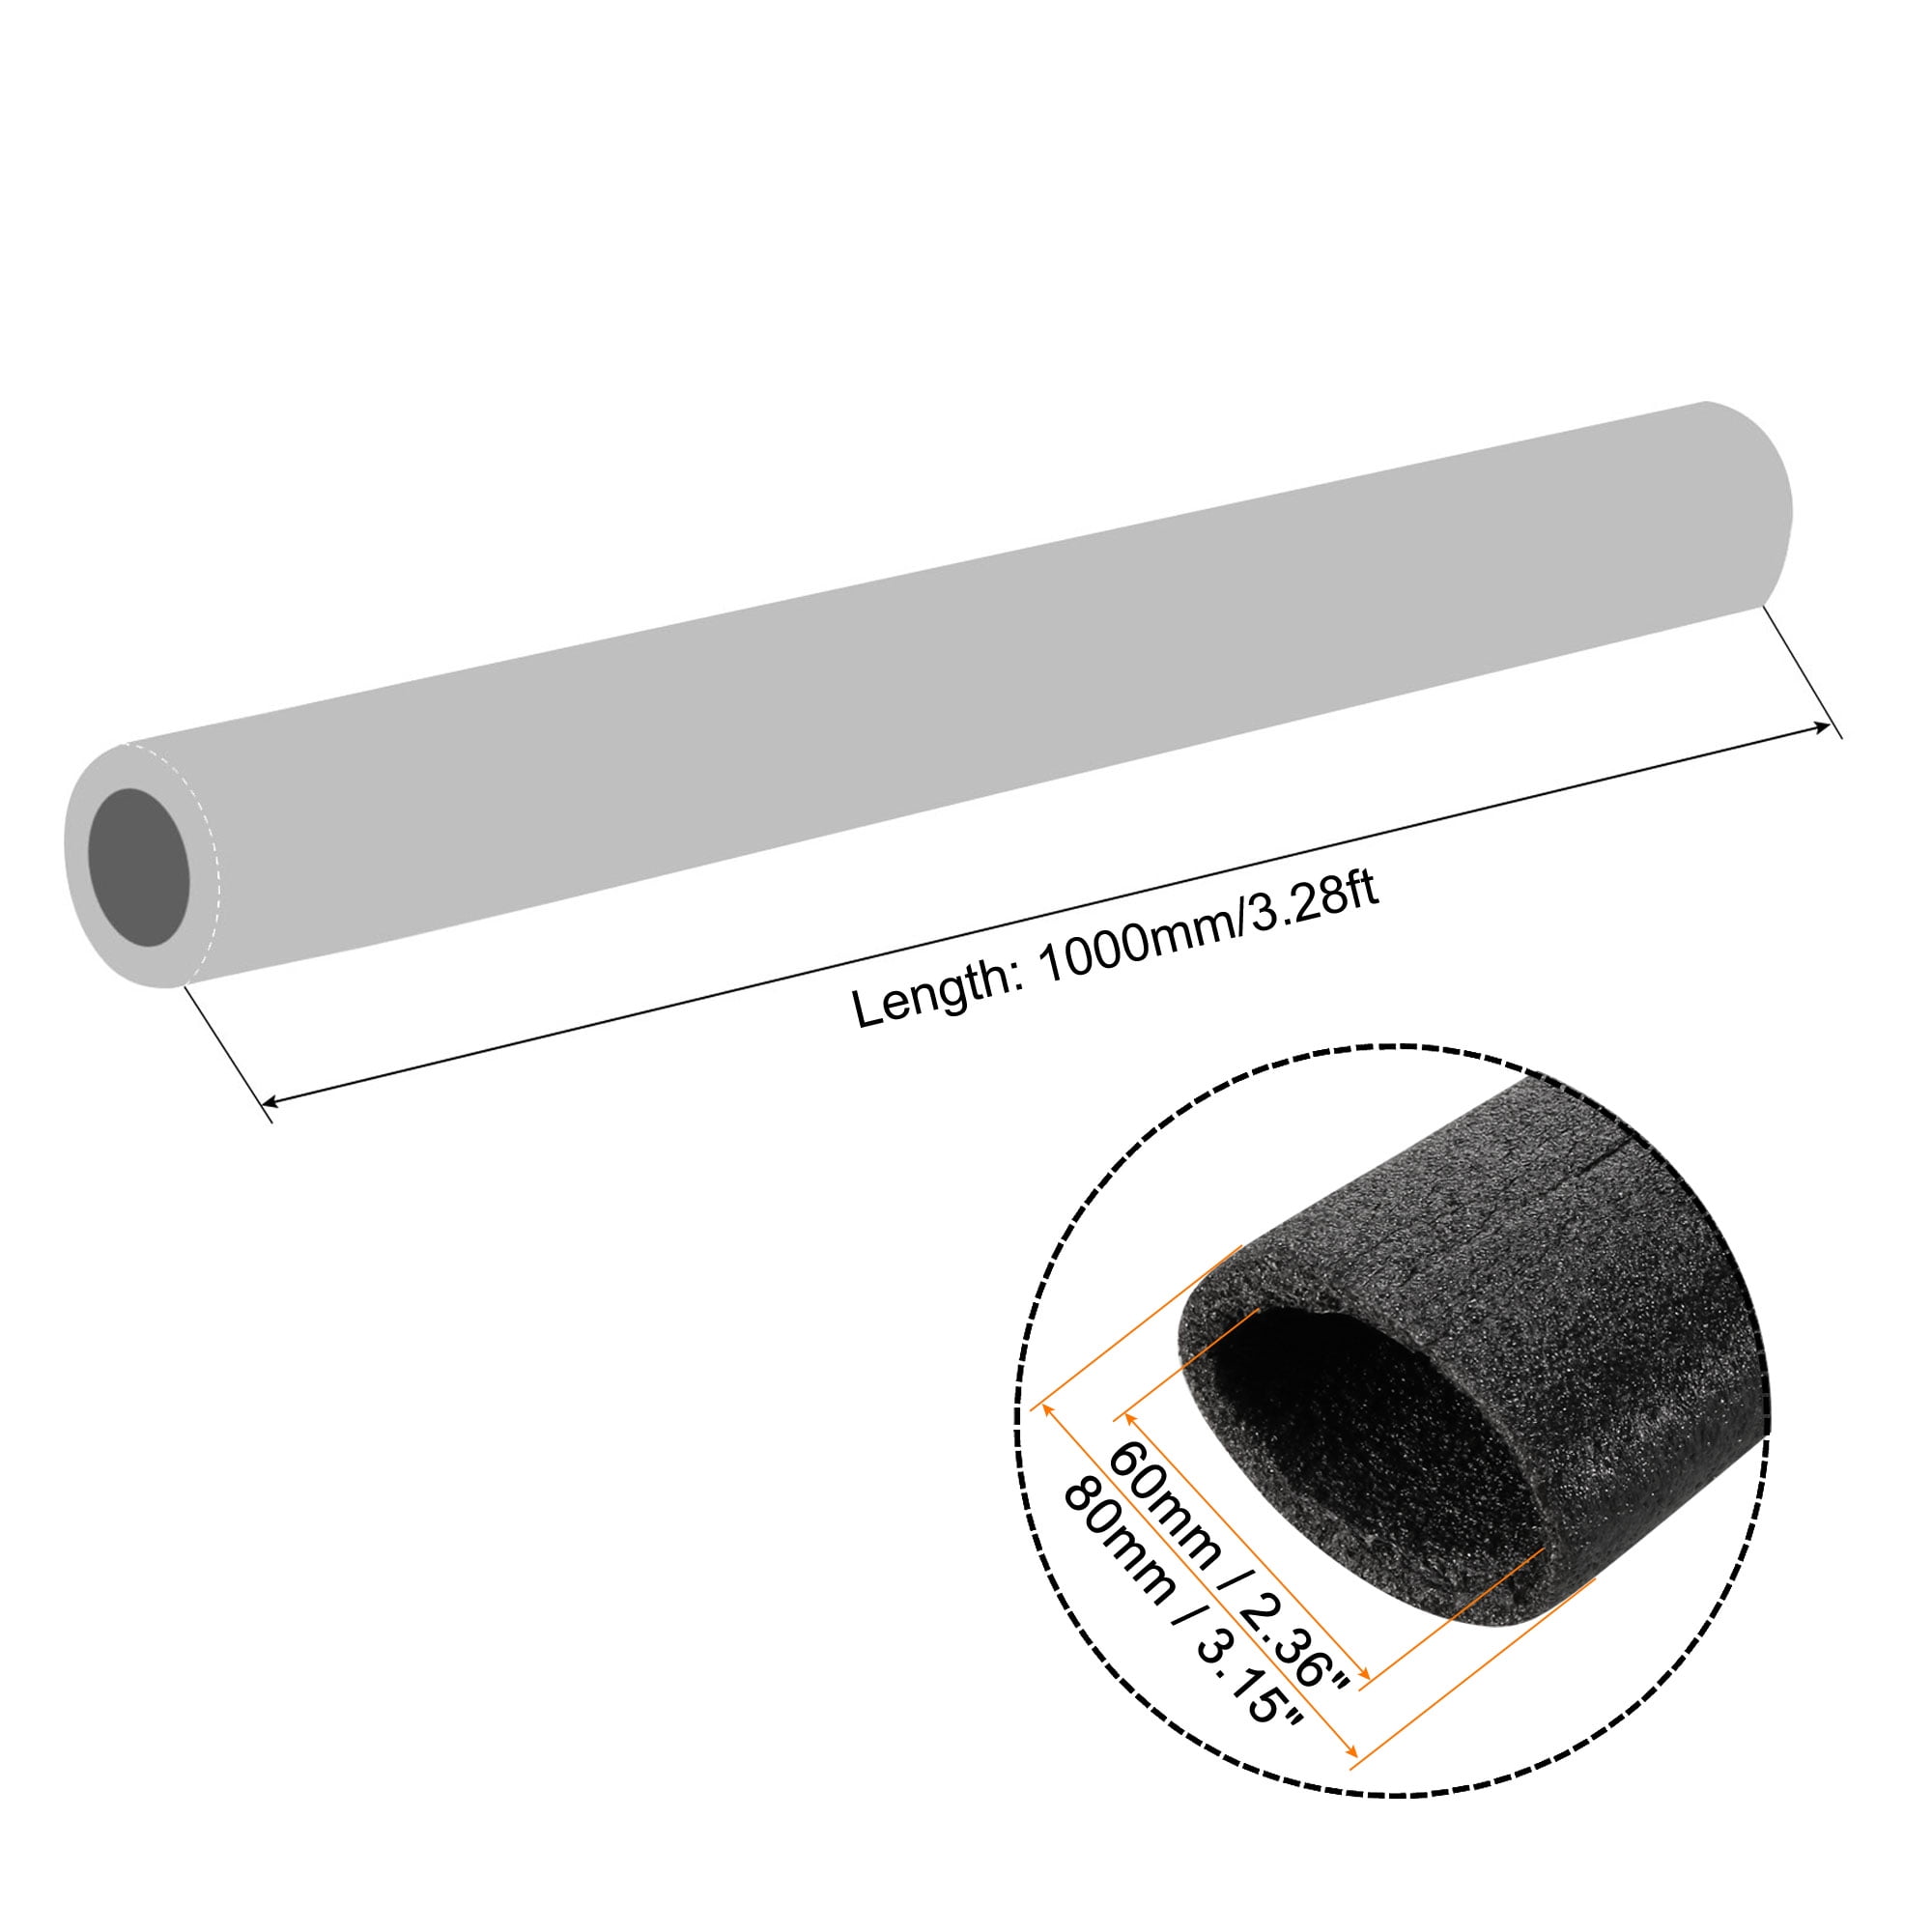 Foam Tube Sponge Protective Sleeve Black Sleeve 60mm(2.36 Inch) ID for Pipe  Insulation, Pack of 4 